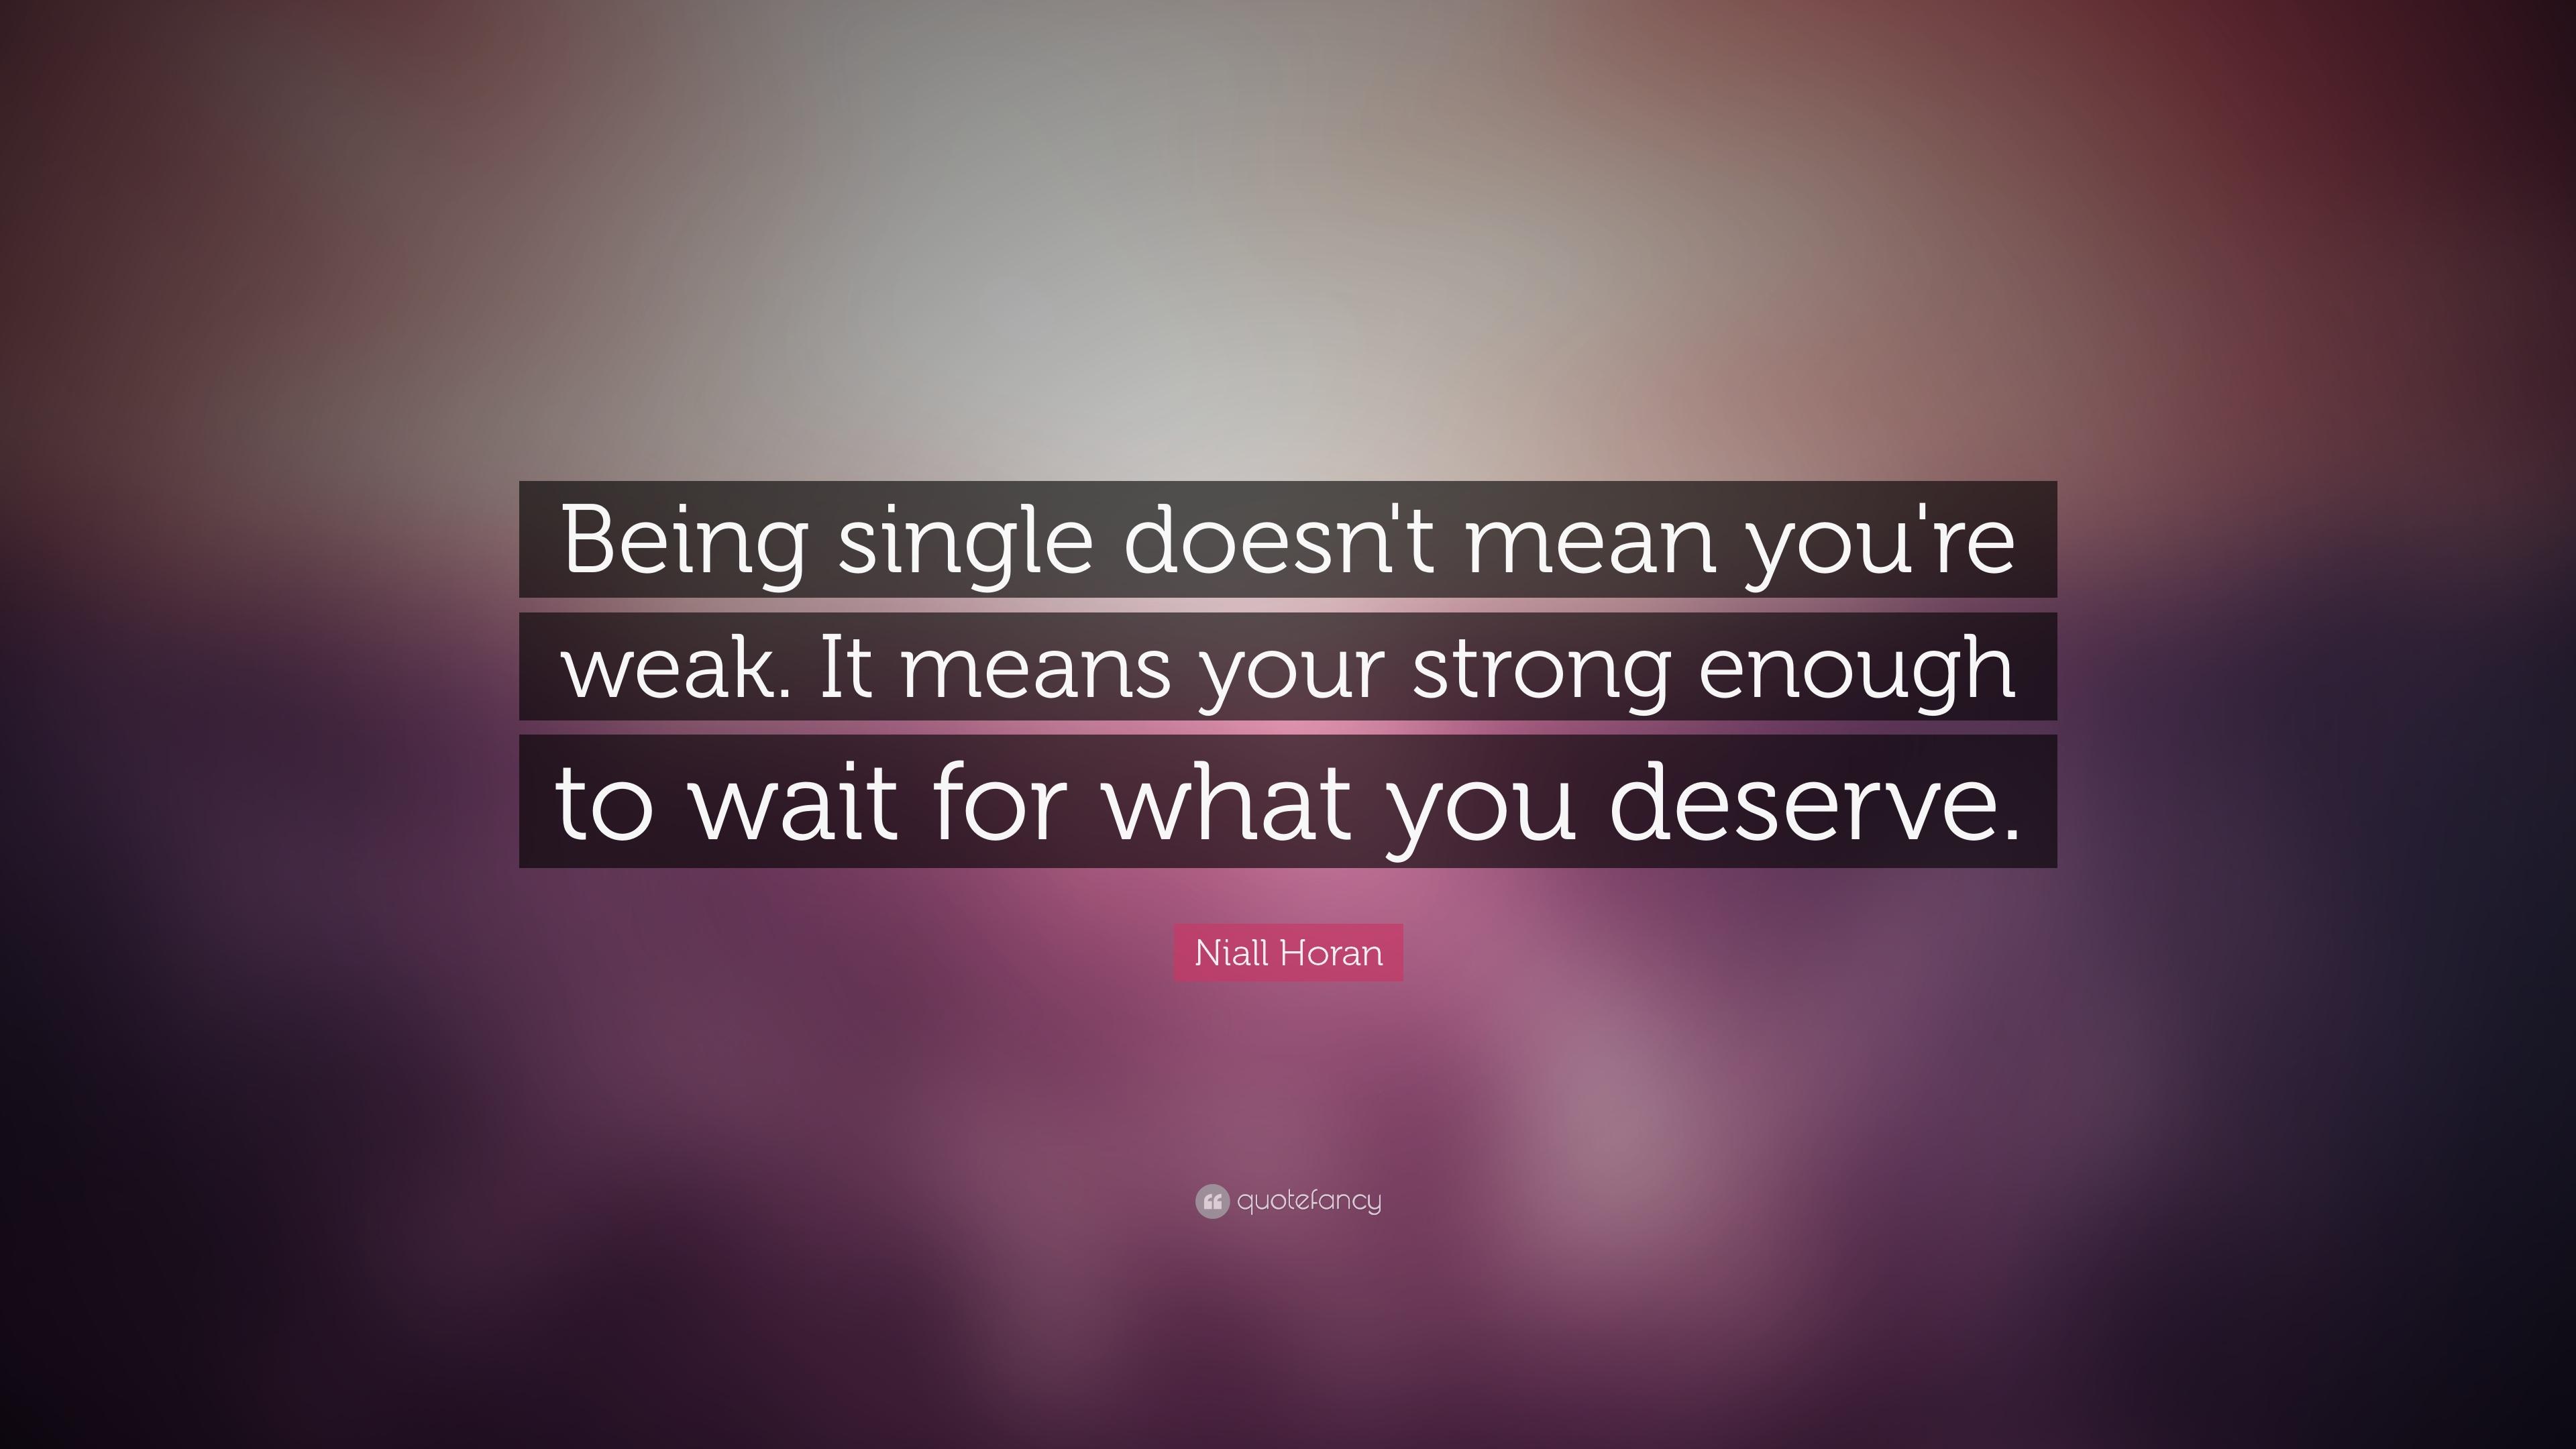 Niall Horan Quote: “Being single doesn't mean you're weak. It means